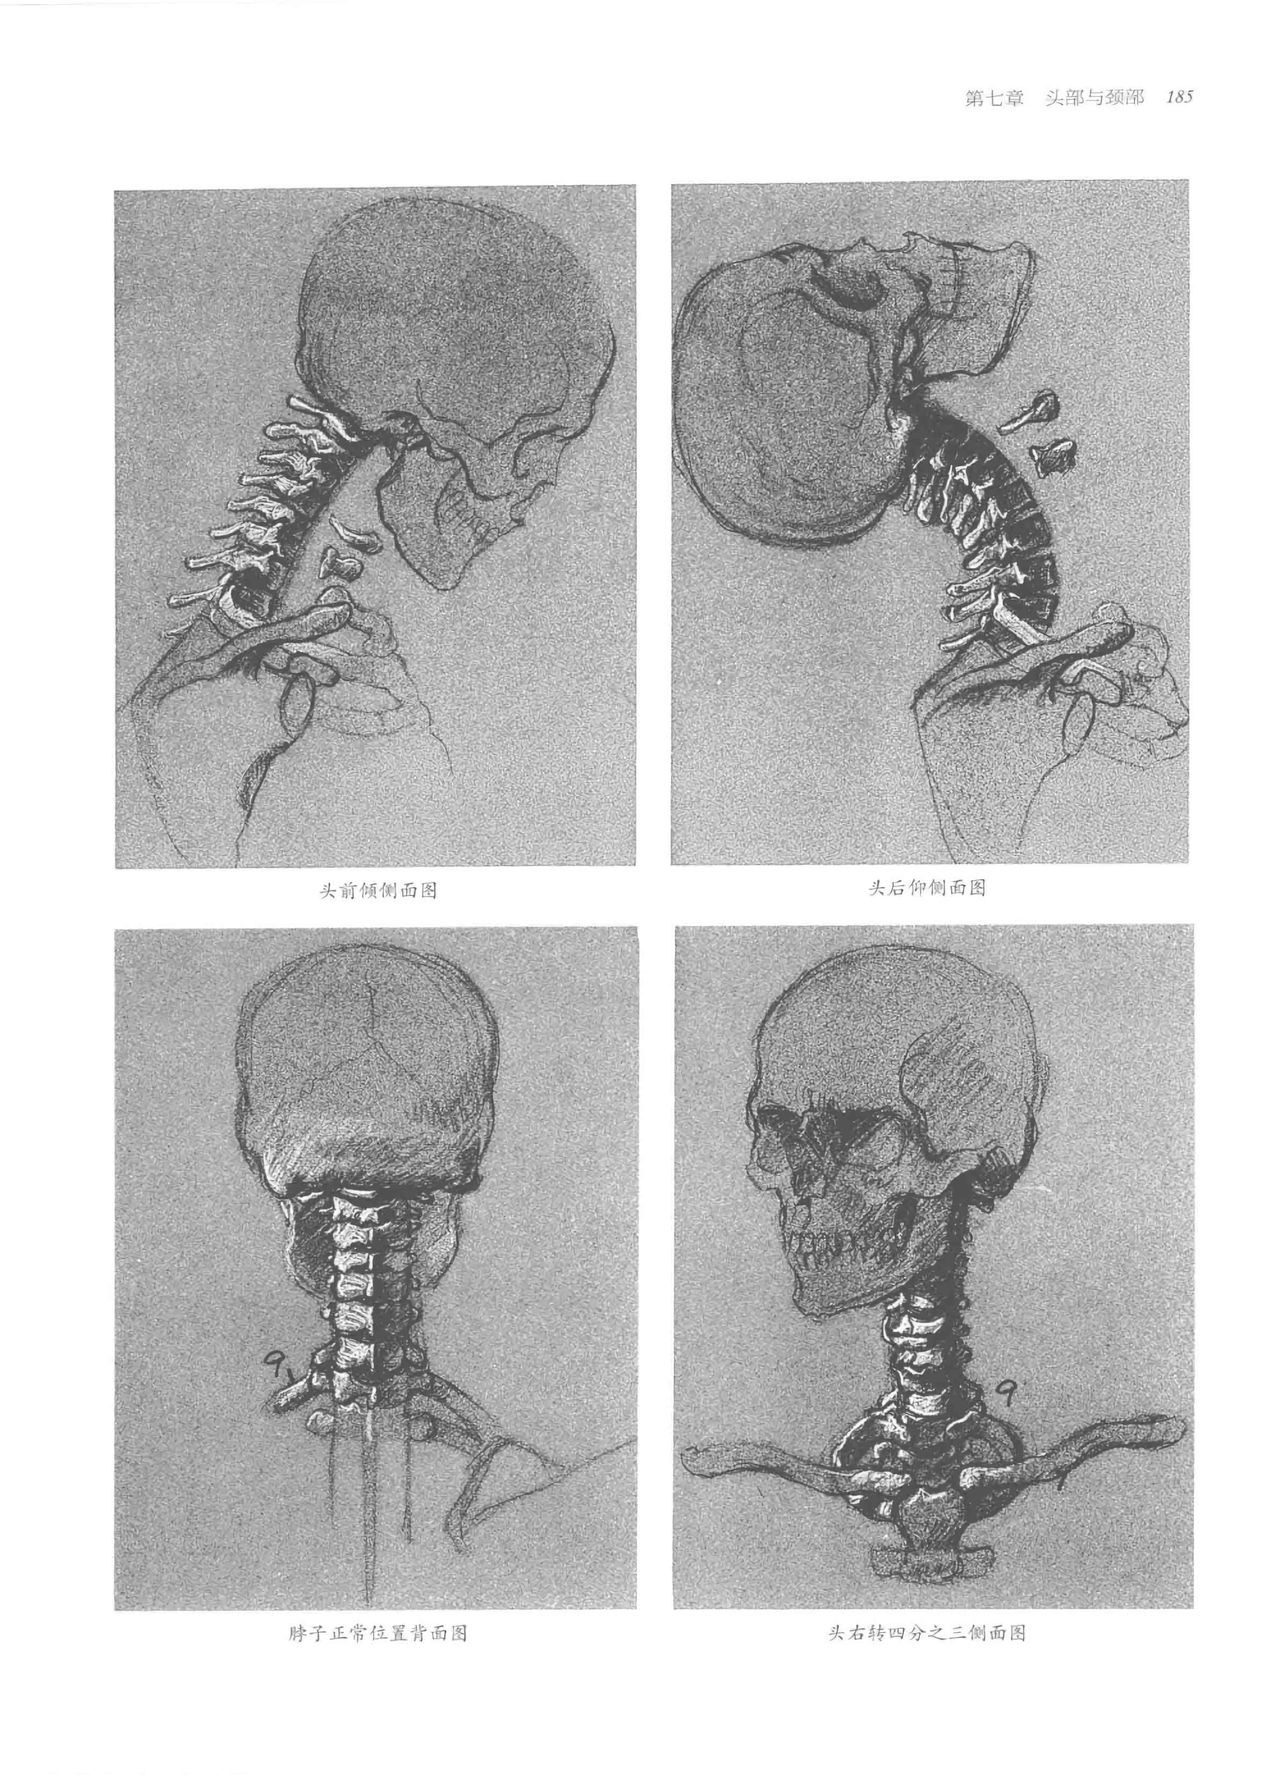 Anatomy-A Complete Guide for Artists - Joseph Sheppard [Chinese] 185